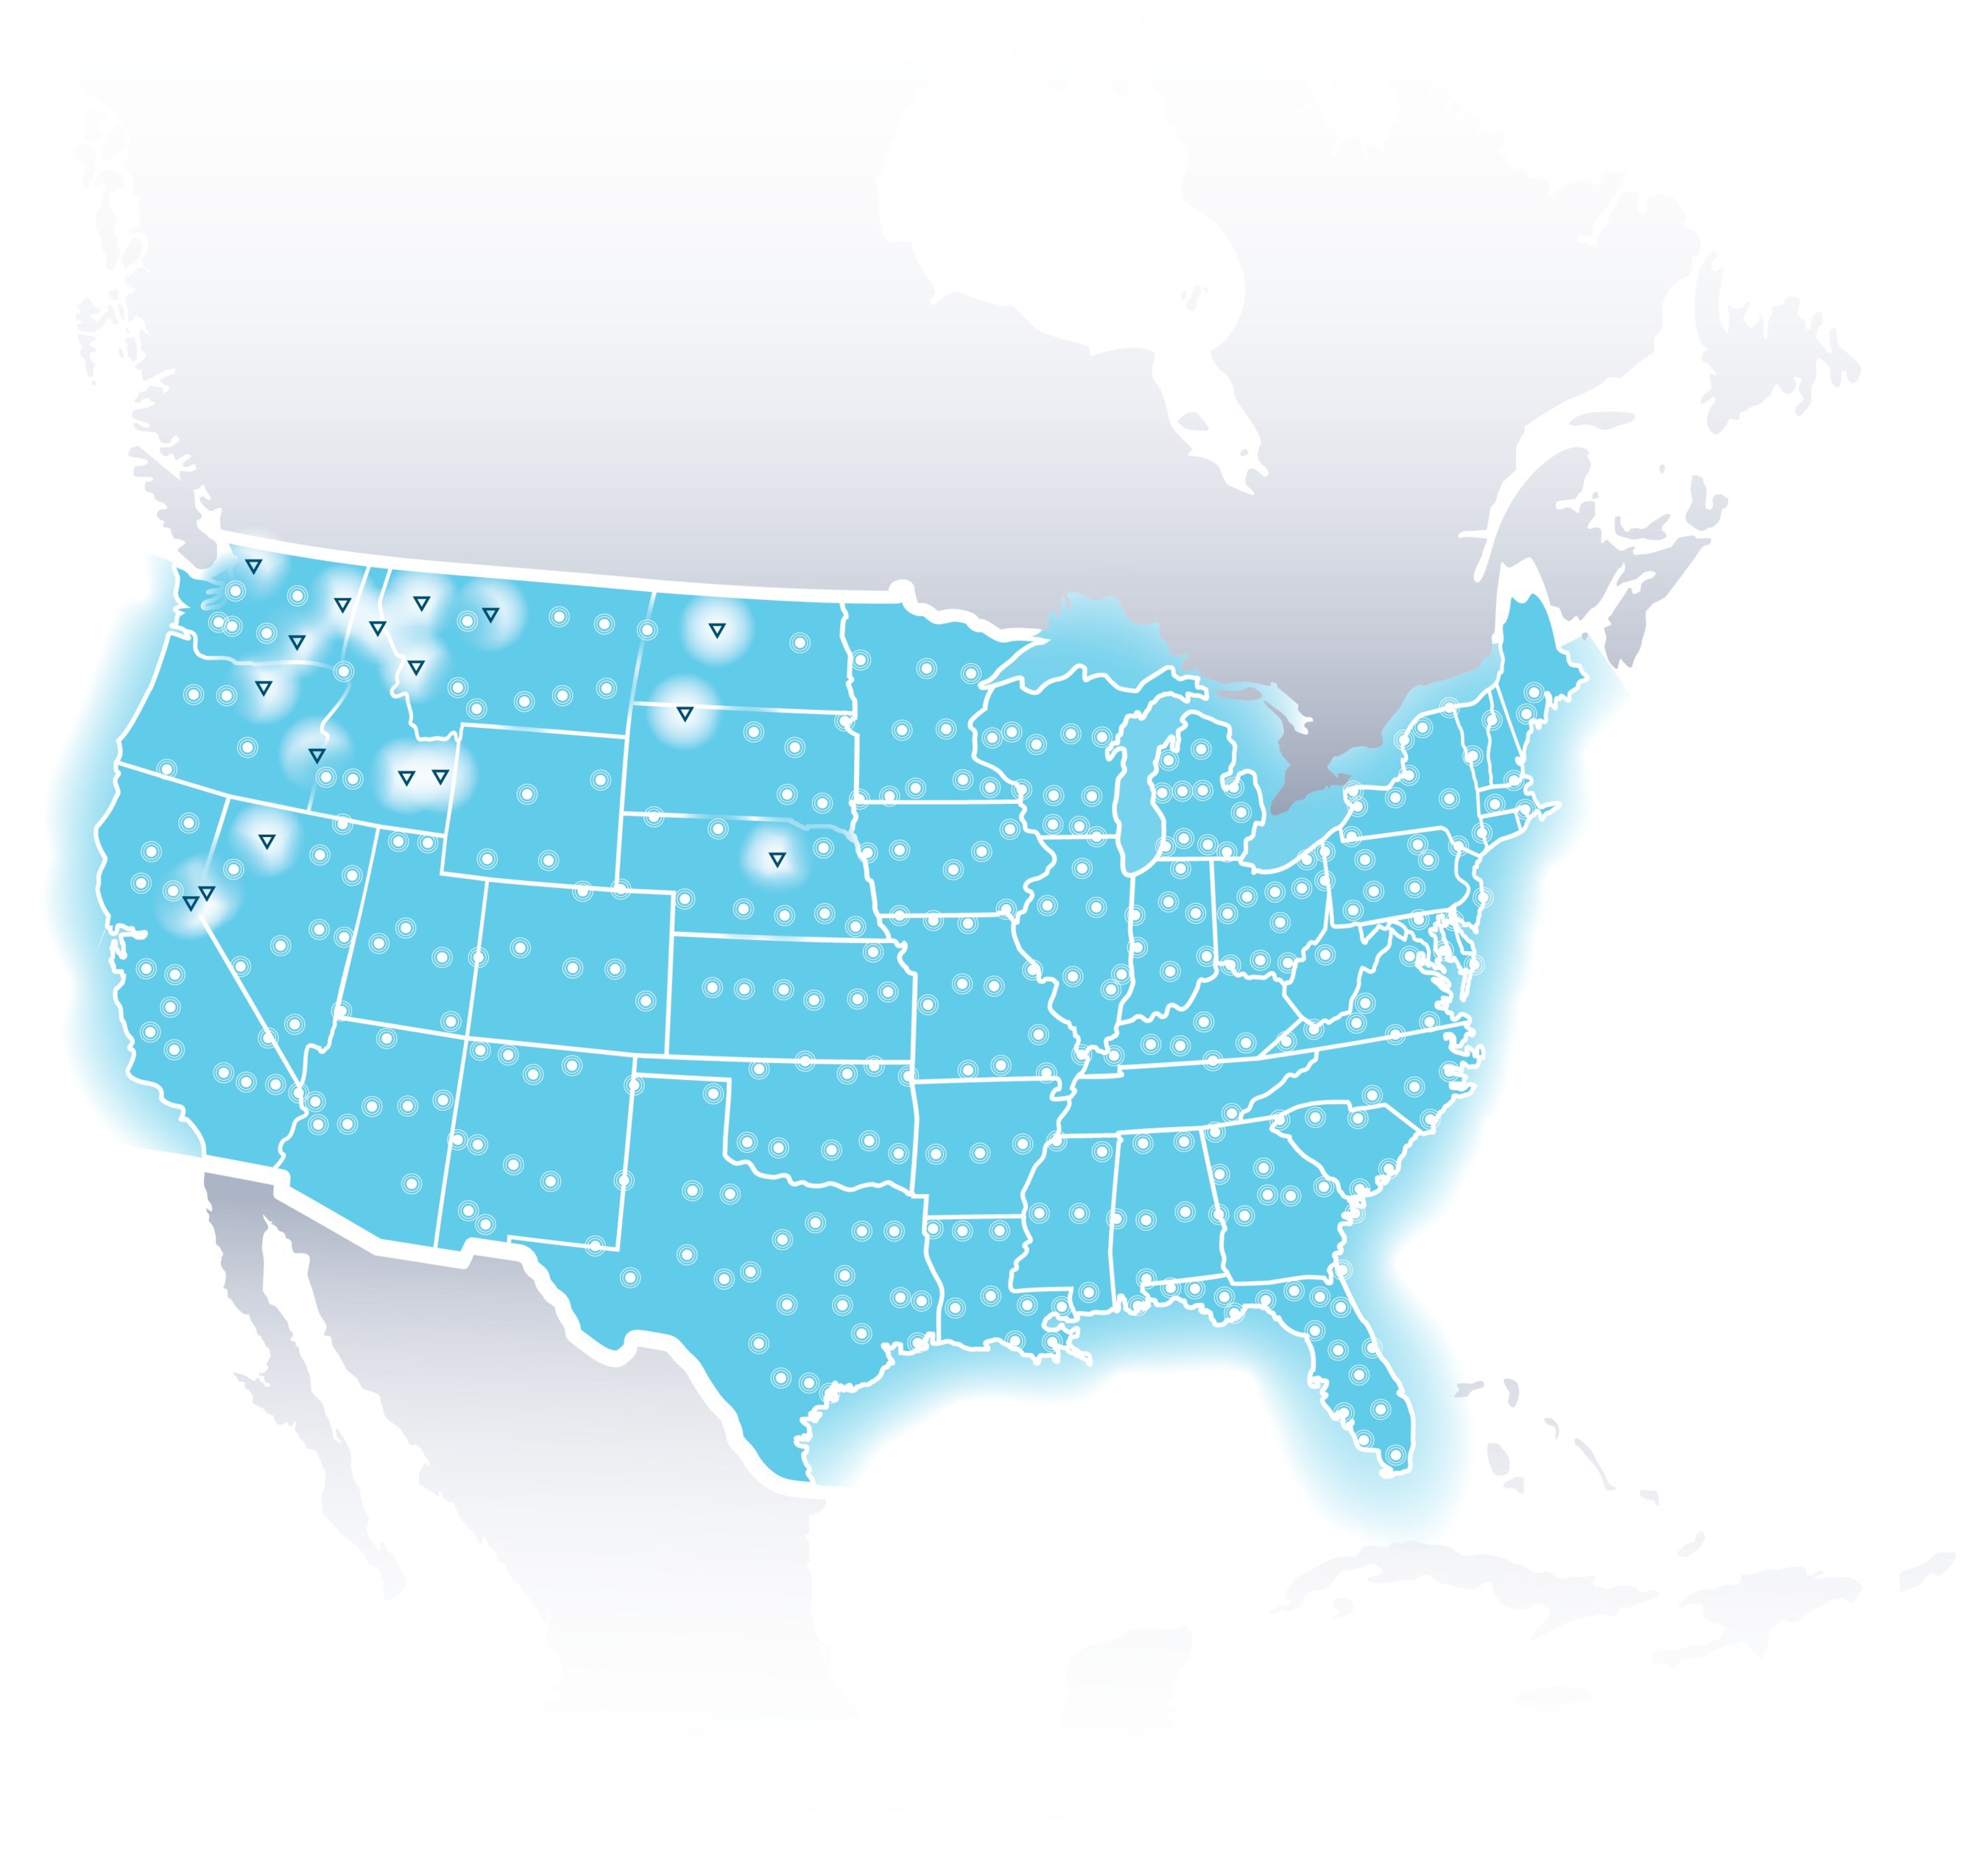 SmartSky currenntly offers full nationwide coverage.